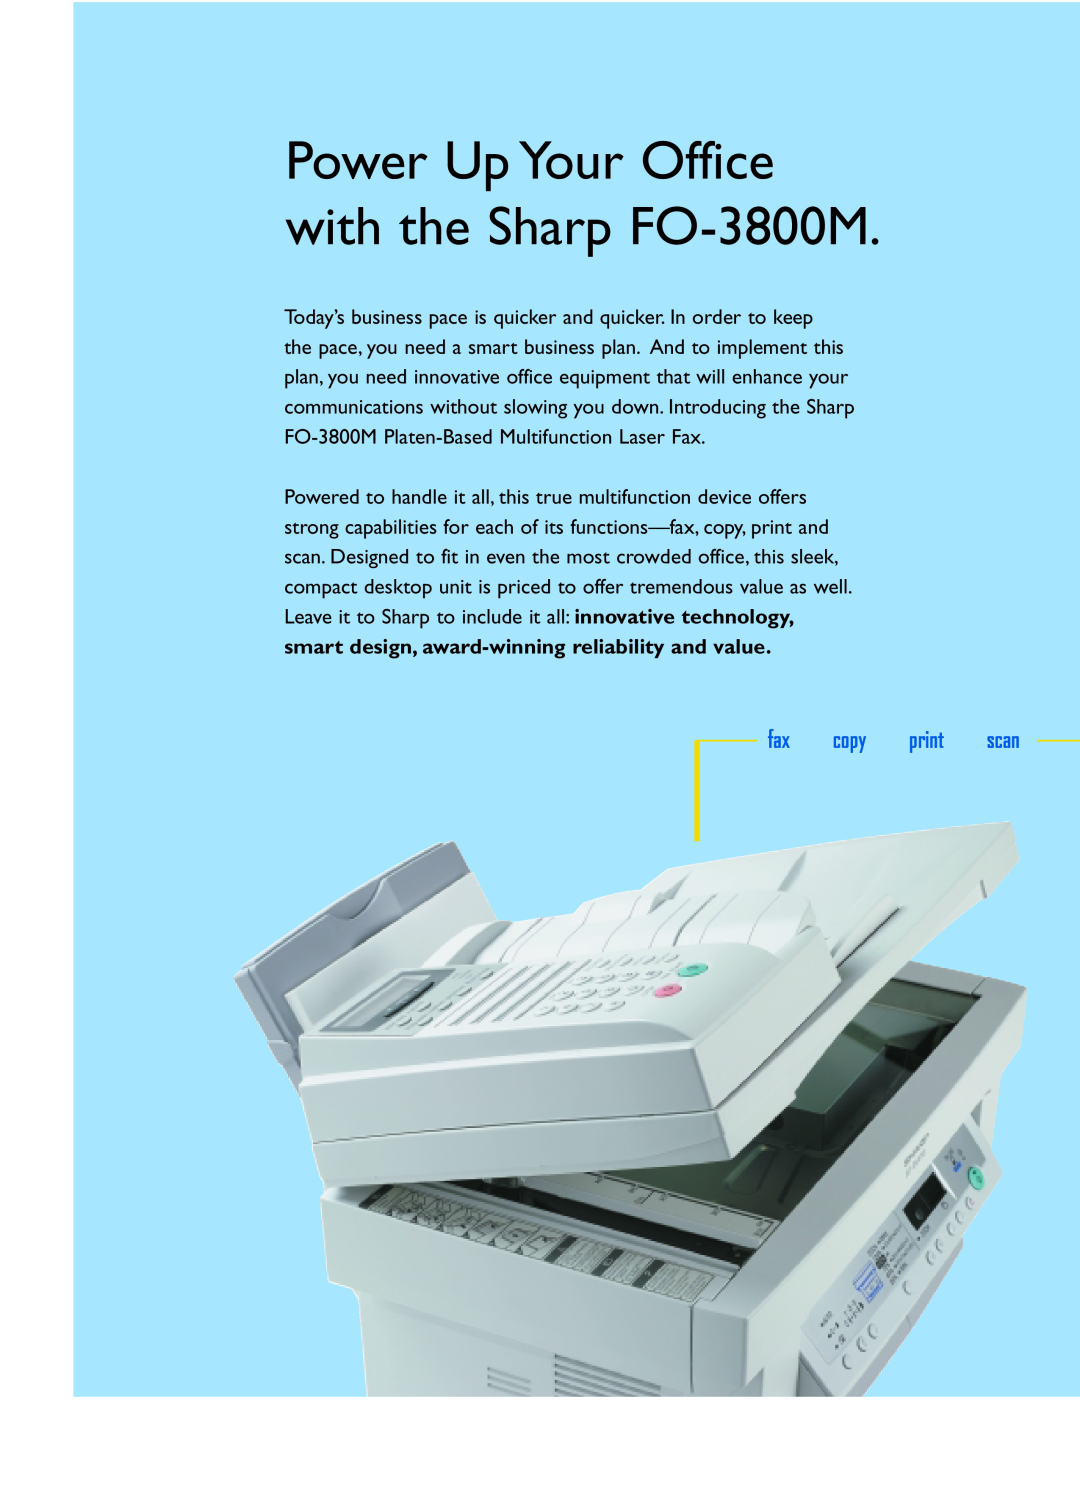 Sharp manual Power Up Your Office with the Sharp FO-3800M, fax copy print scan 